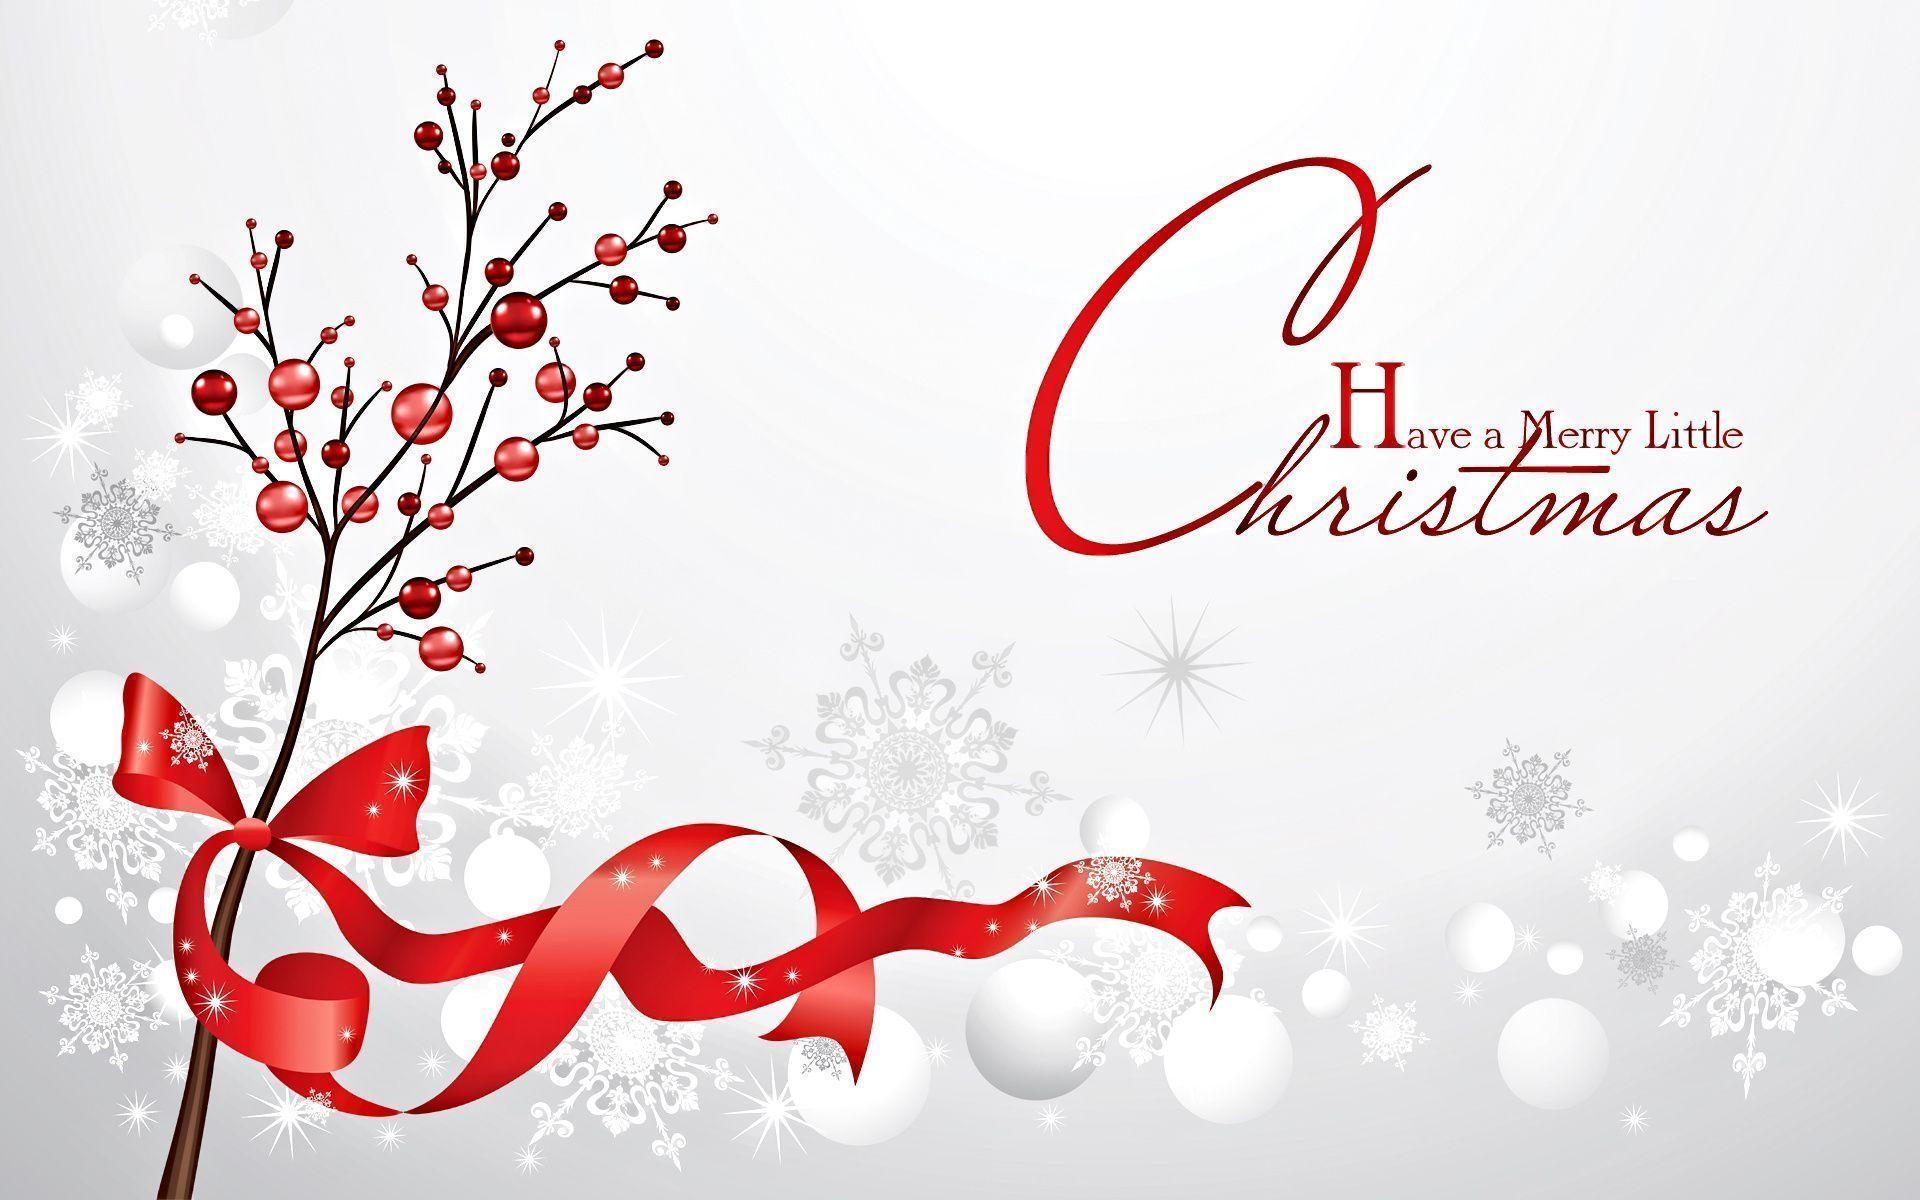 Merry Christmas HD Wallpaper Free Download